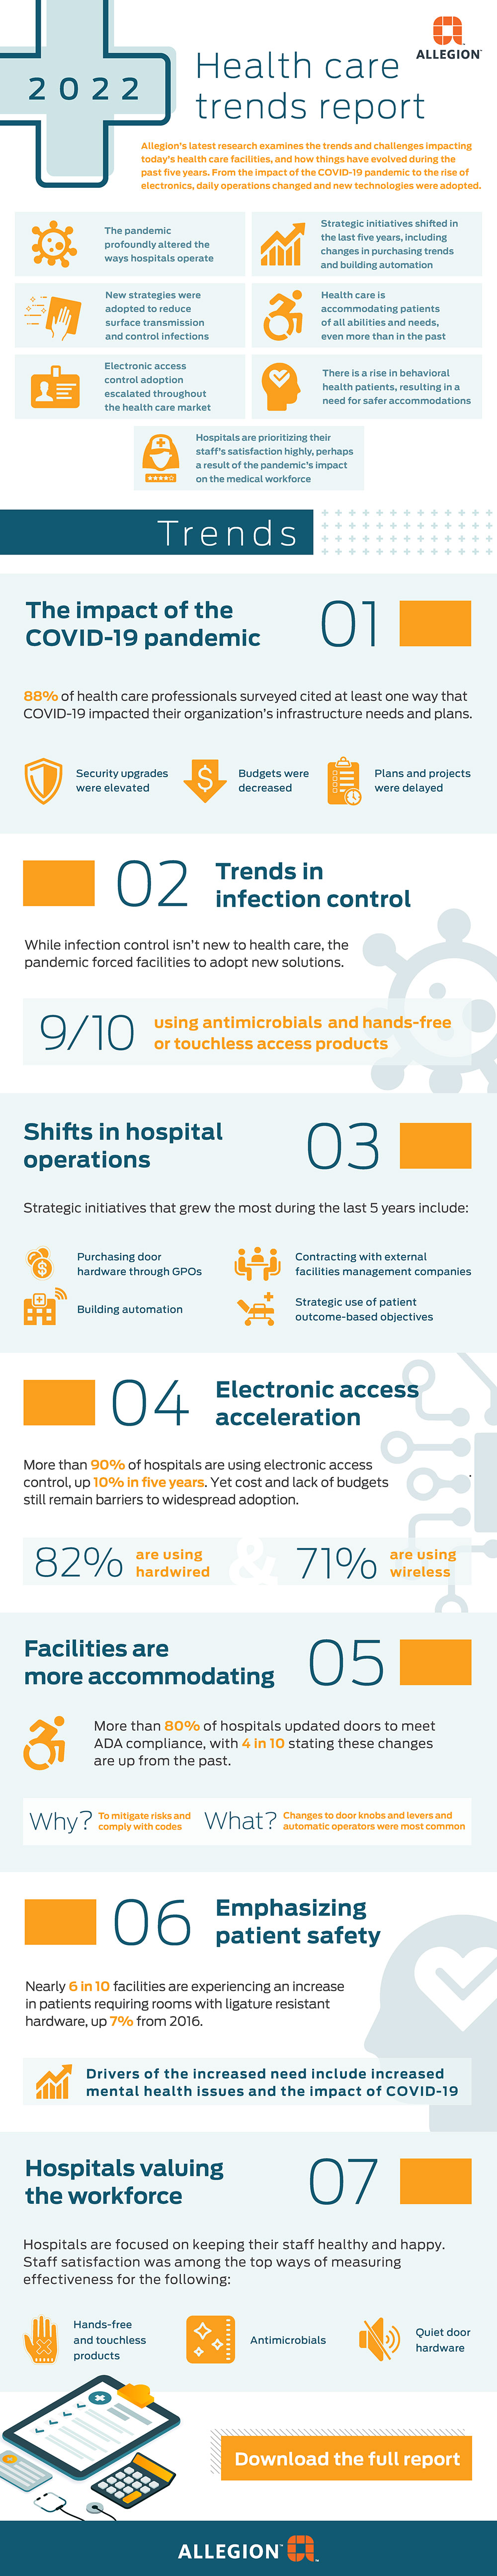 2022 health care trends infographic